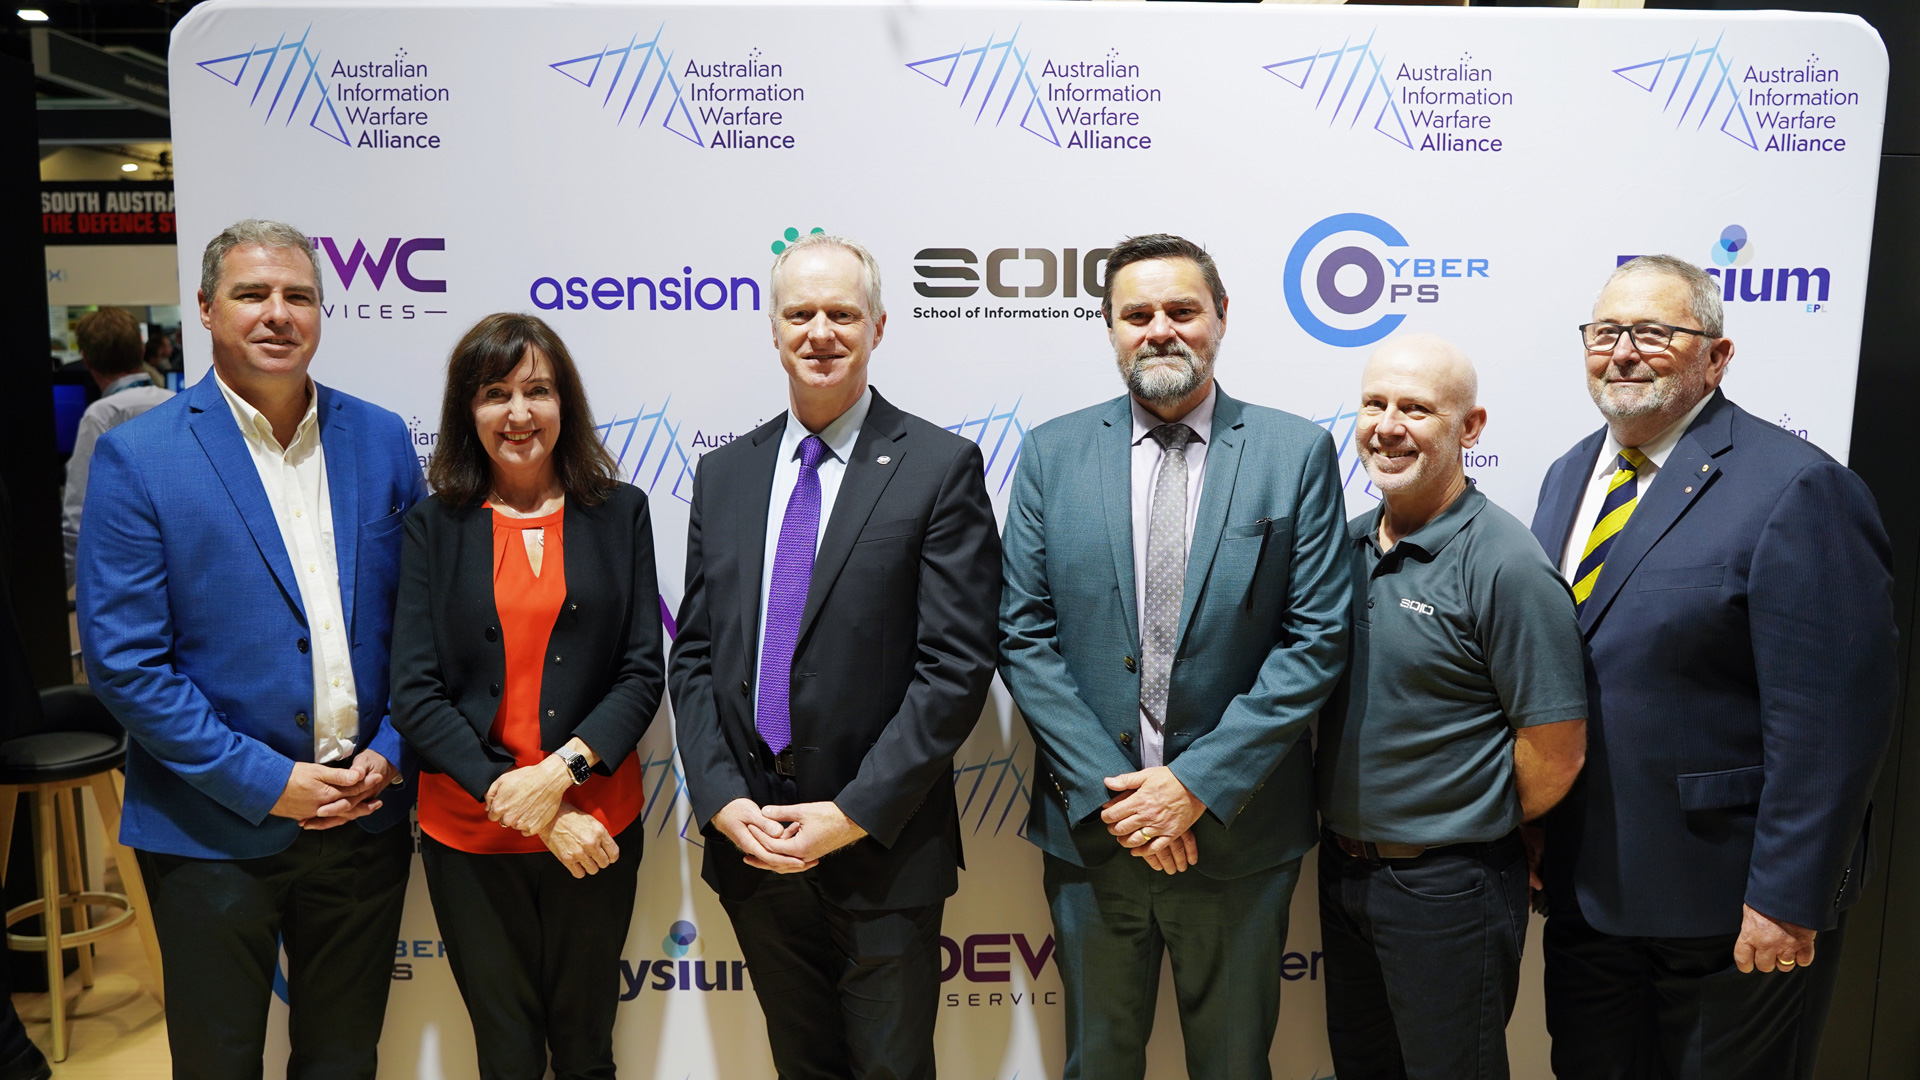 Members of the Australian Information Warfare Alliance with South Australia's Deputy Premier, Susan Close MP, and Defence SA Advisory Board Acting Chair, Vice Admiral Russell Crane AO CSM RAN (Ret'd)